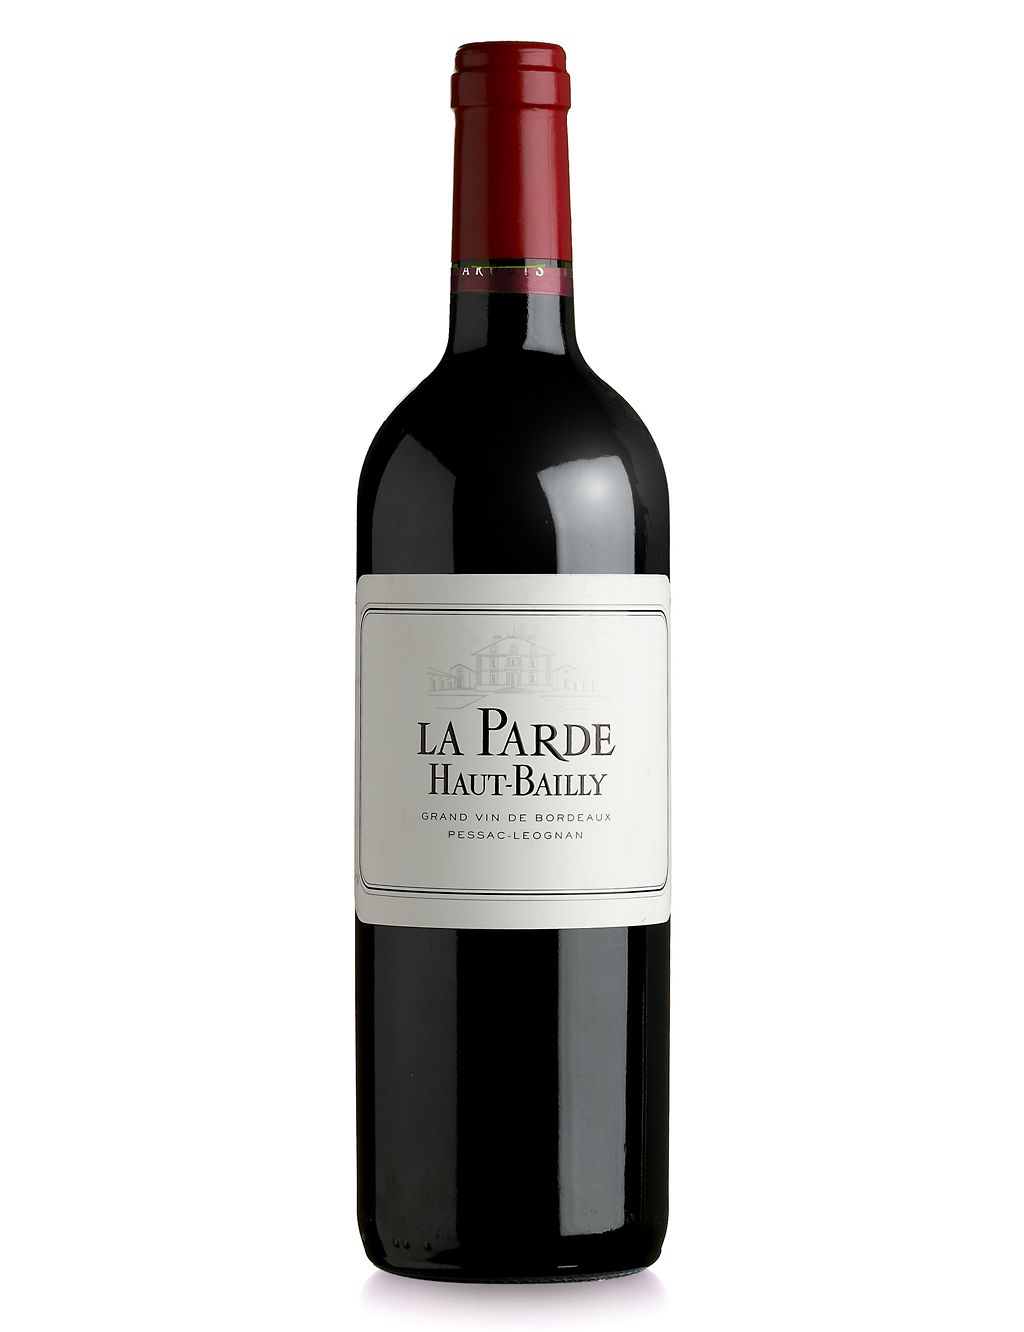 Le Parde Haut-Bailly - Case of 6 1 of 1